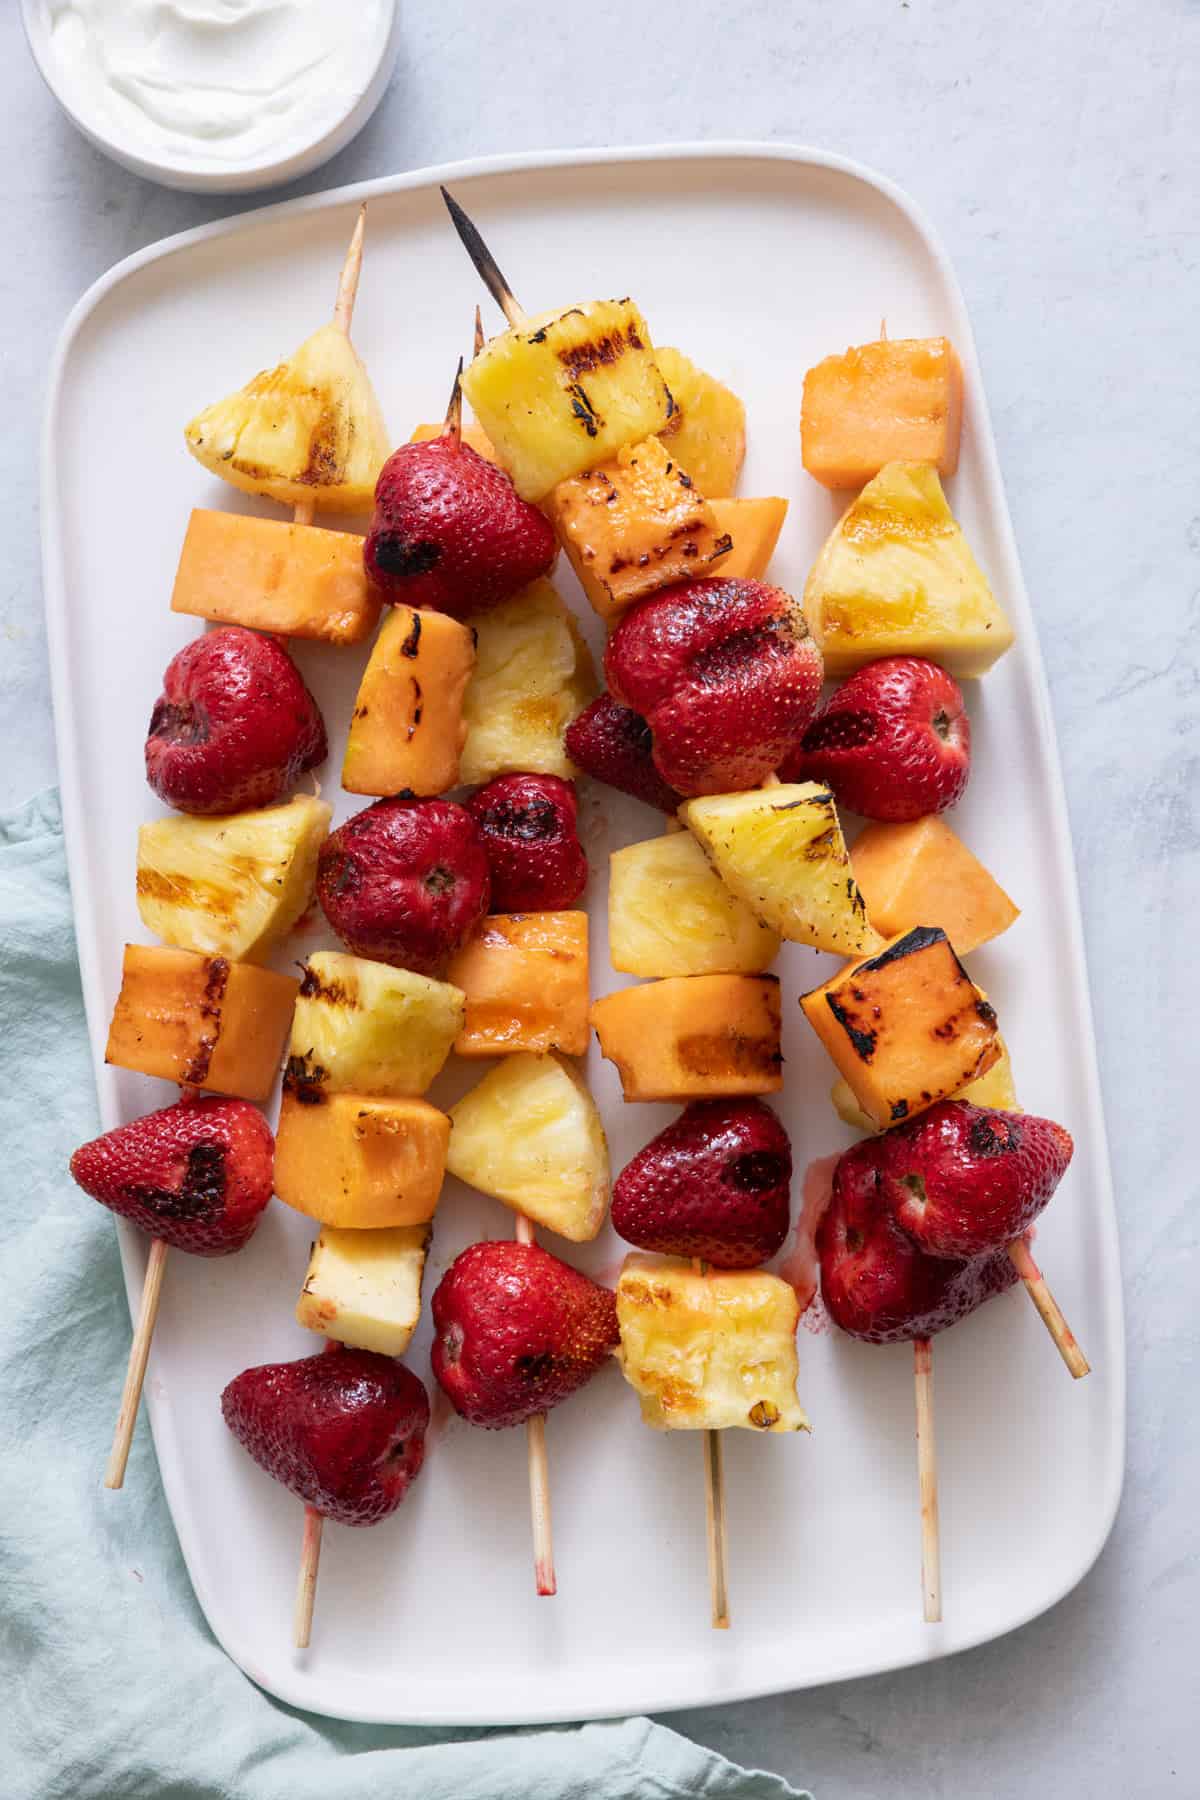 Large rectangle white platter with 6 Grilled fruit kabobs.